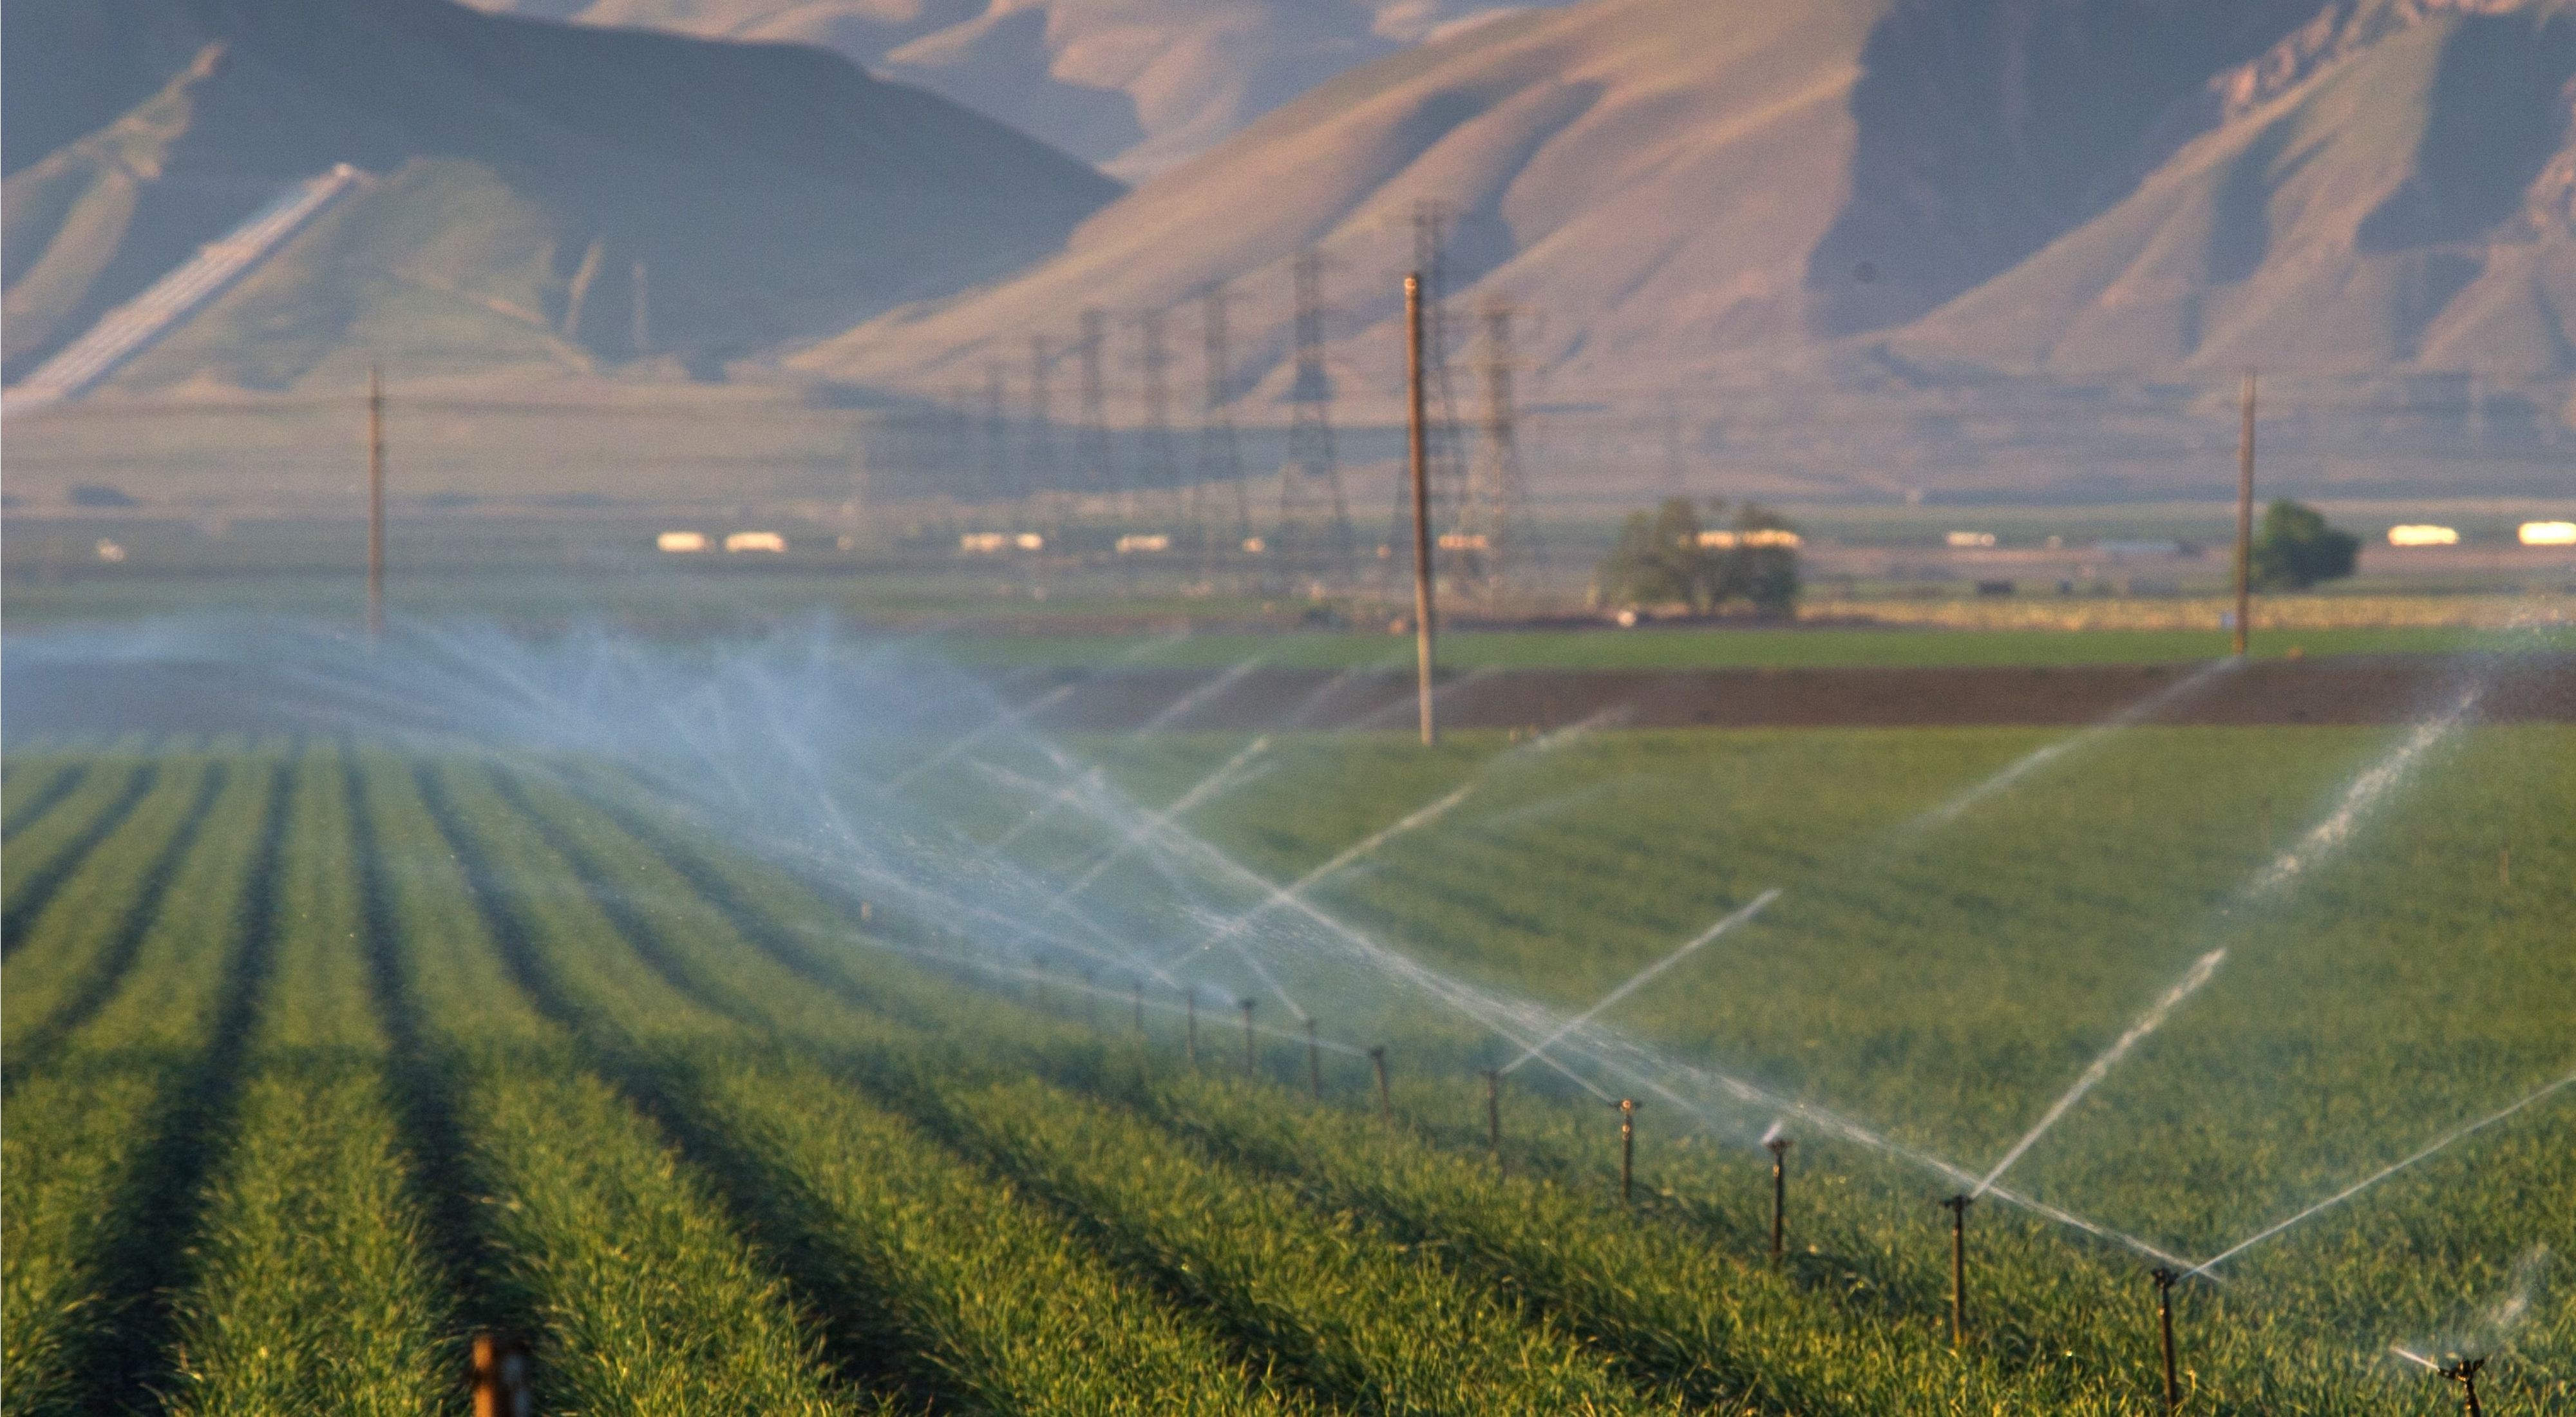 Water sprinkling over rows of crops in a farm field with arid mountainsides in the distance.